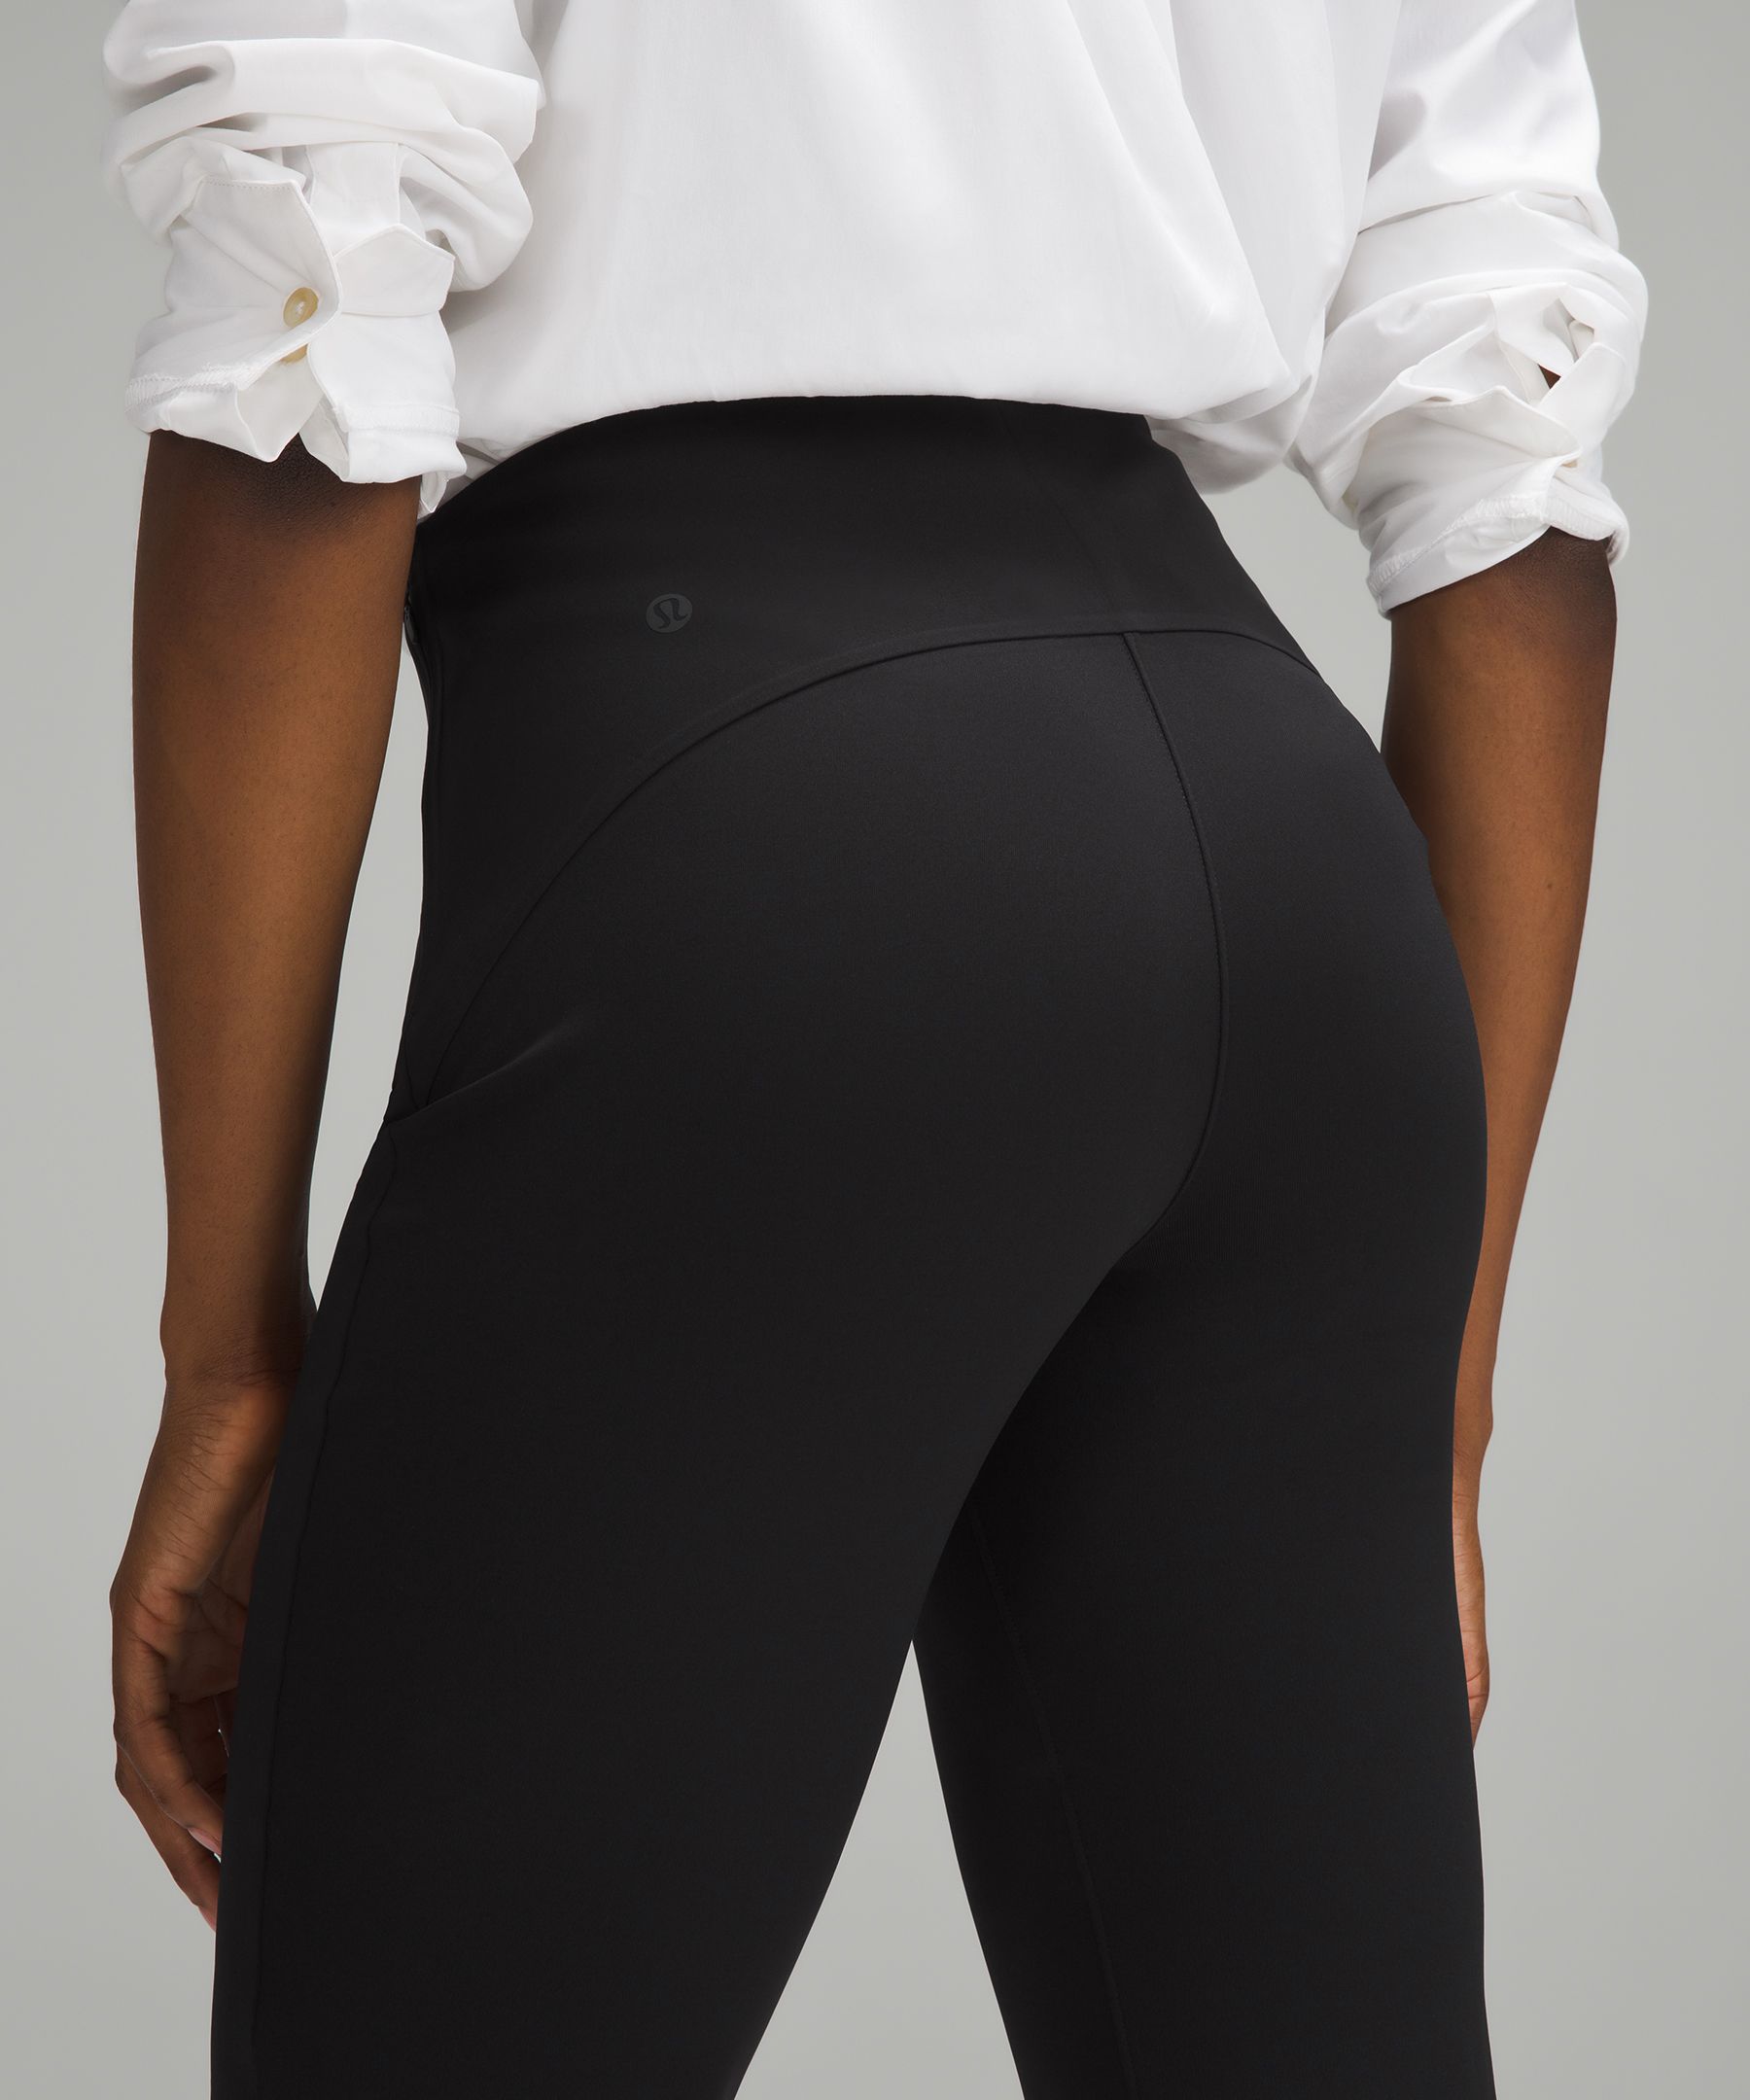 Smooth Fit Pull-On High-Rise Pant *Tall | Women's Pants